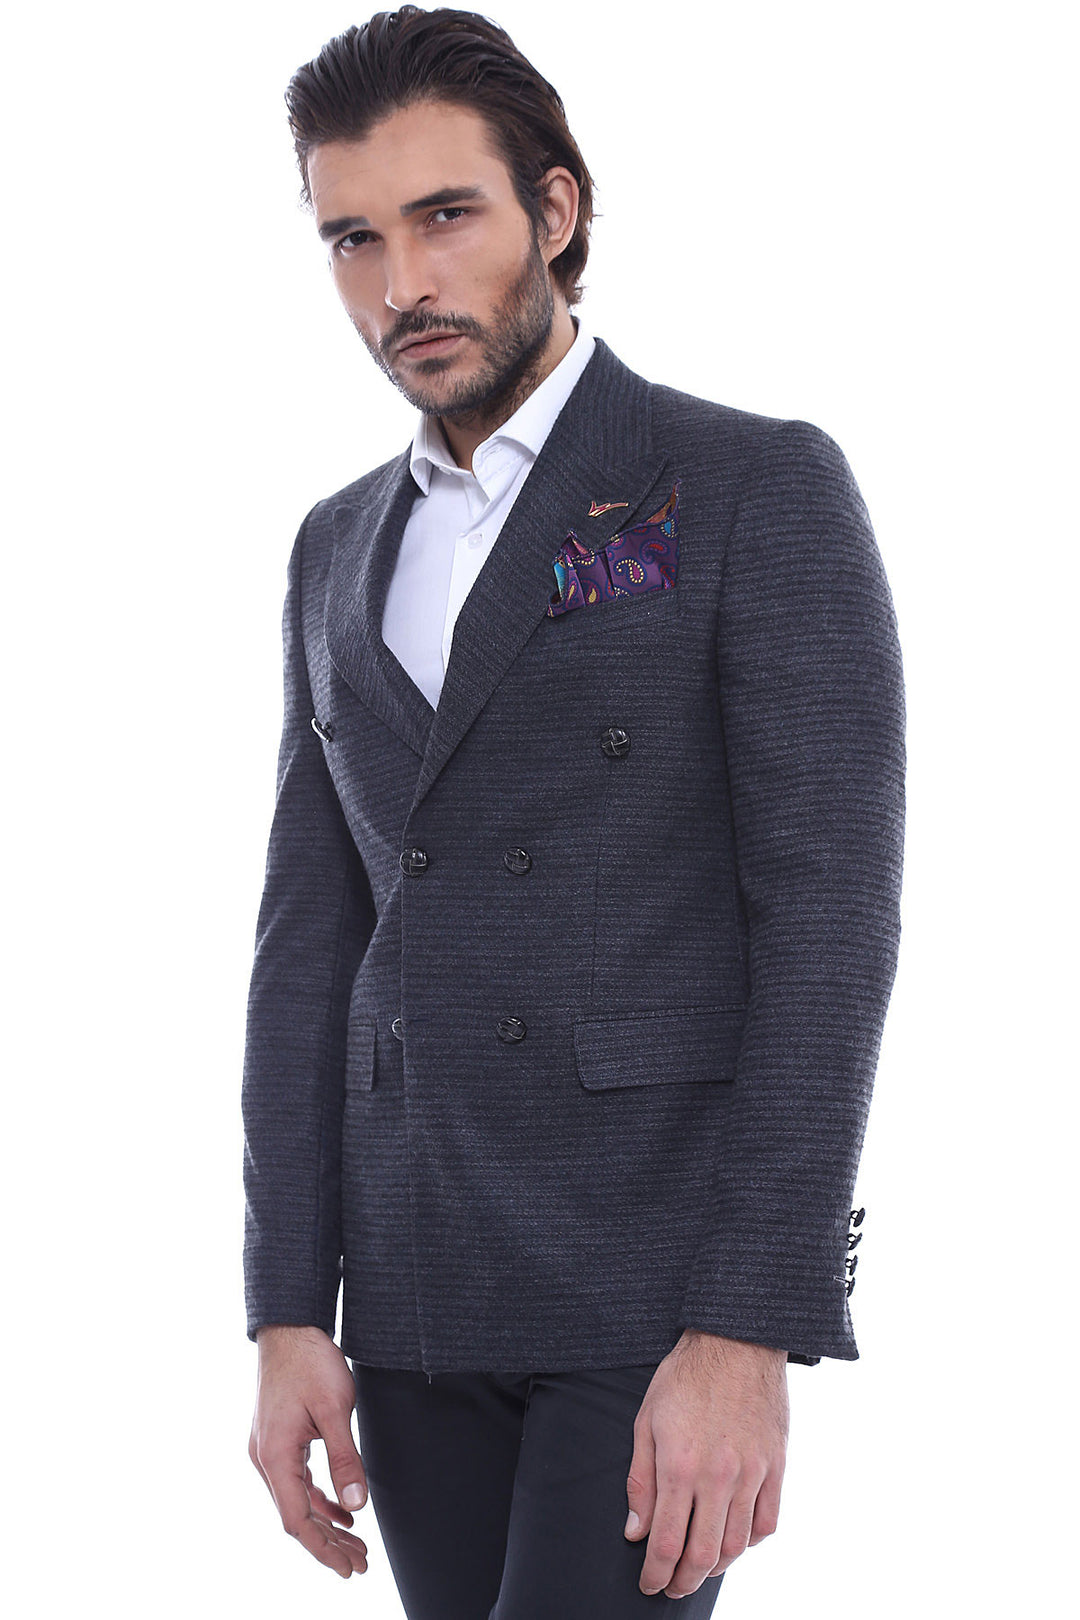 Double Breasted Slim Fit Navy Blue Blazer - Wessi